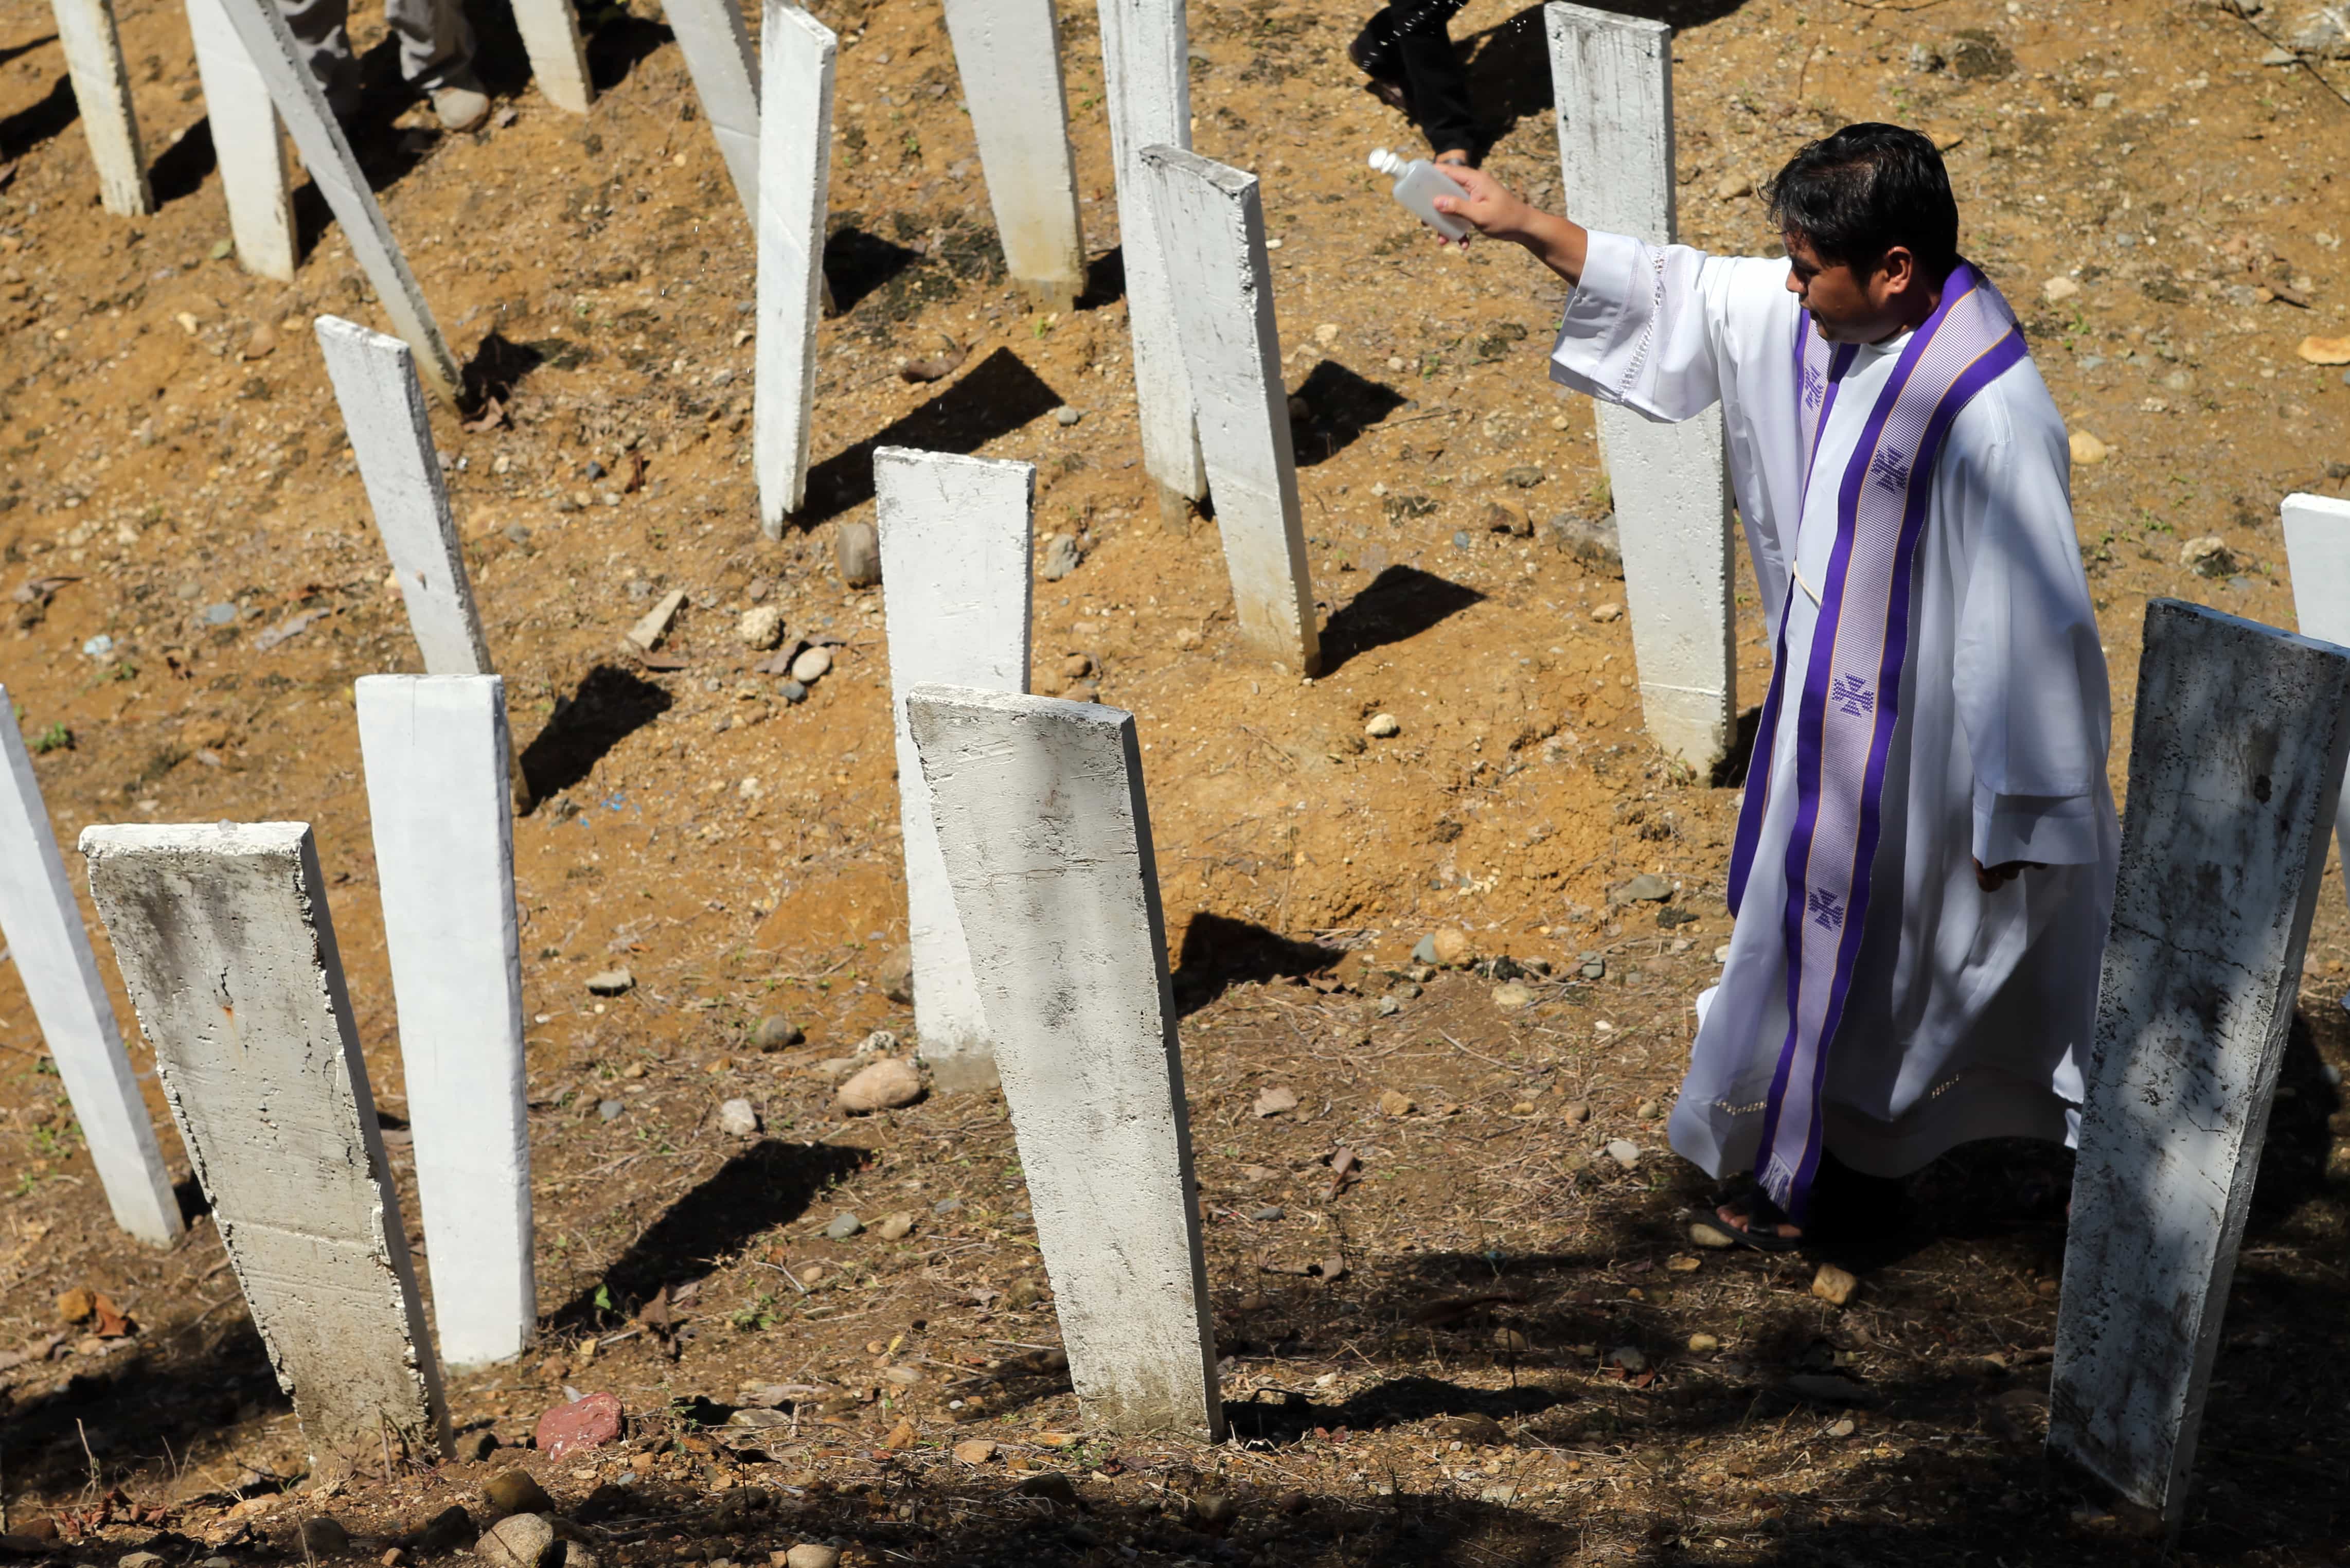 A Roman Catholic priest blesses the site where 58 people, 32 of them journalists, were killed in the southern town of Ampatuan, Maguindanao, Philippines, 21 November, 2014, Jeoffrey Maitem/Getty Images